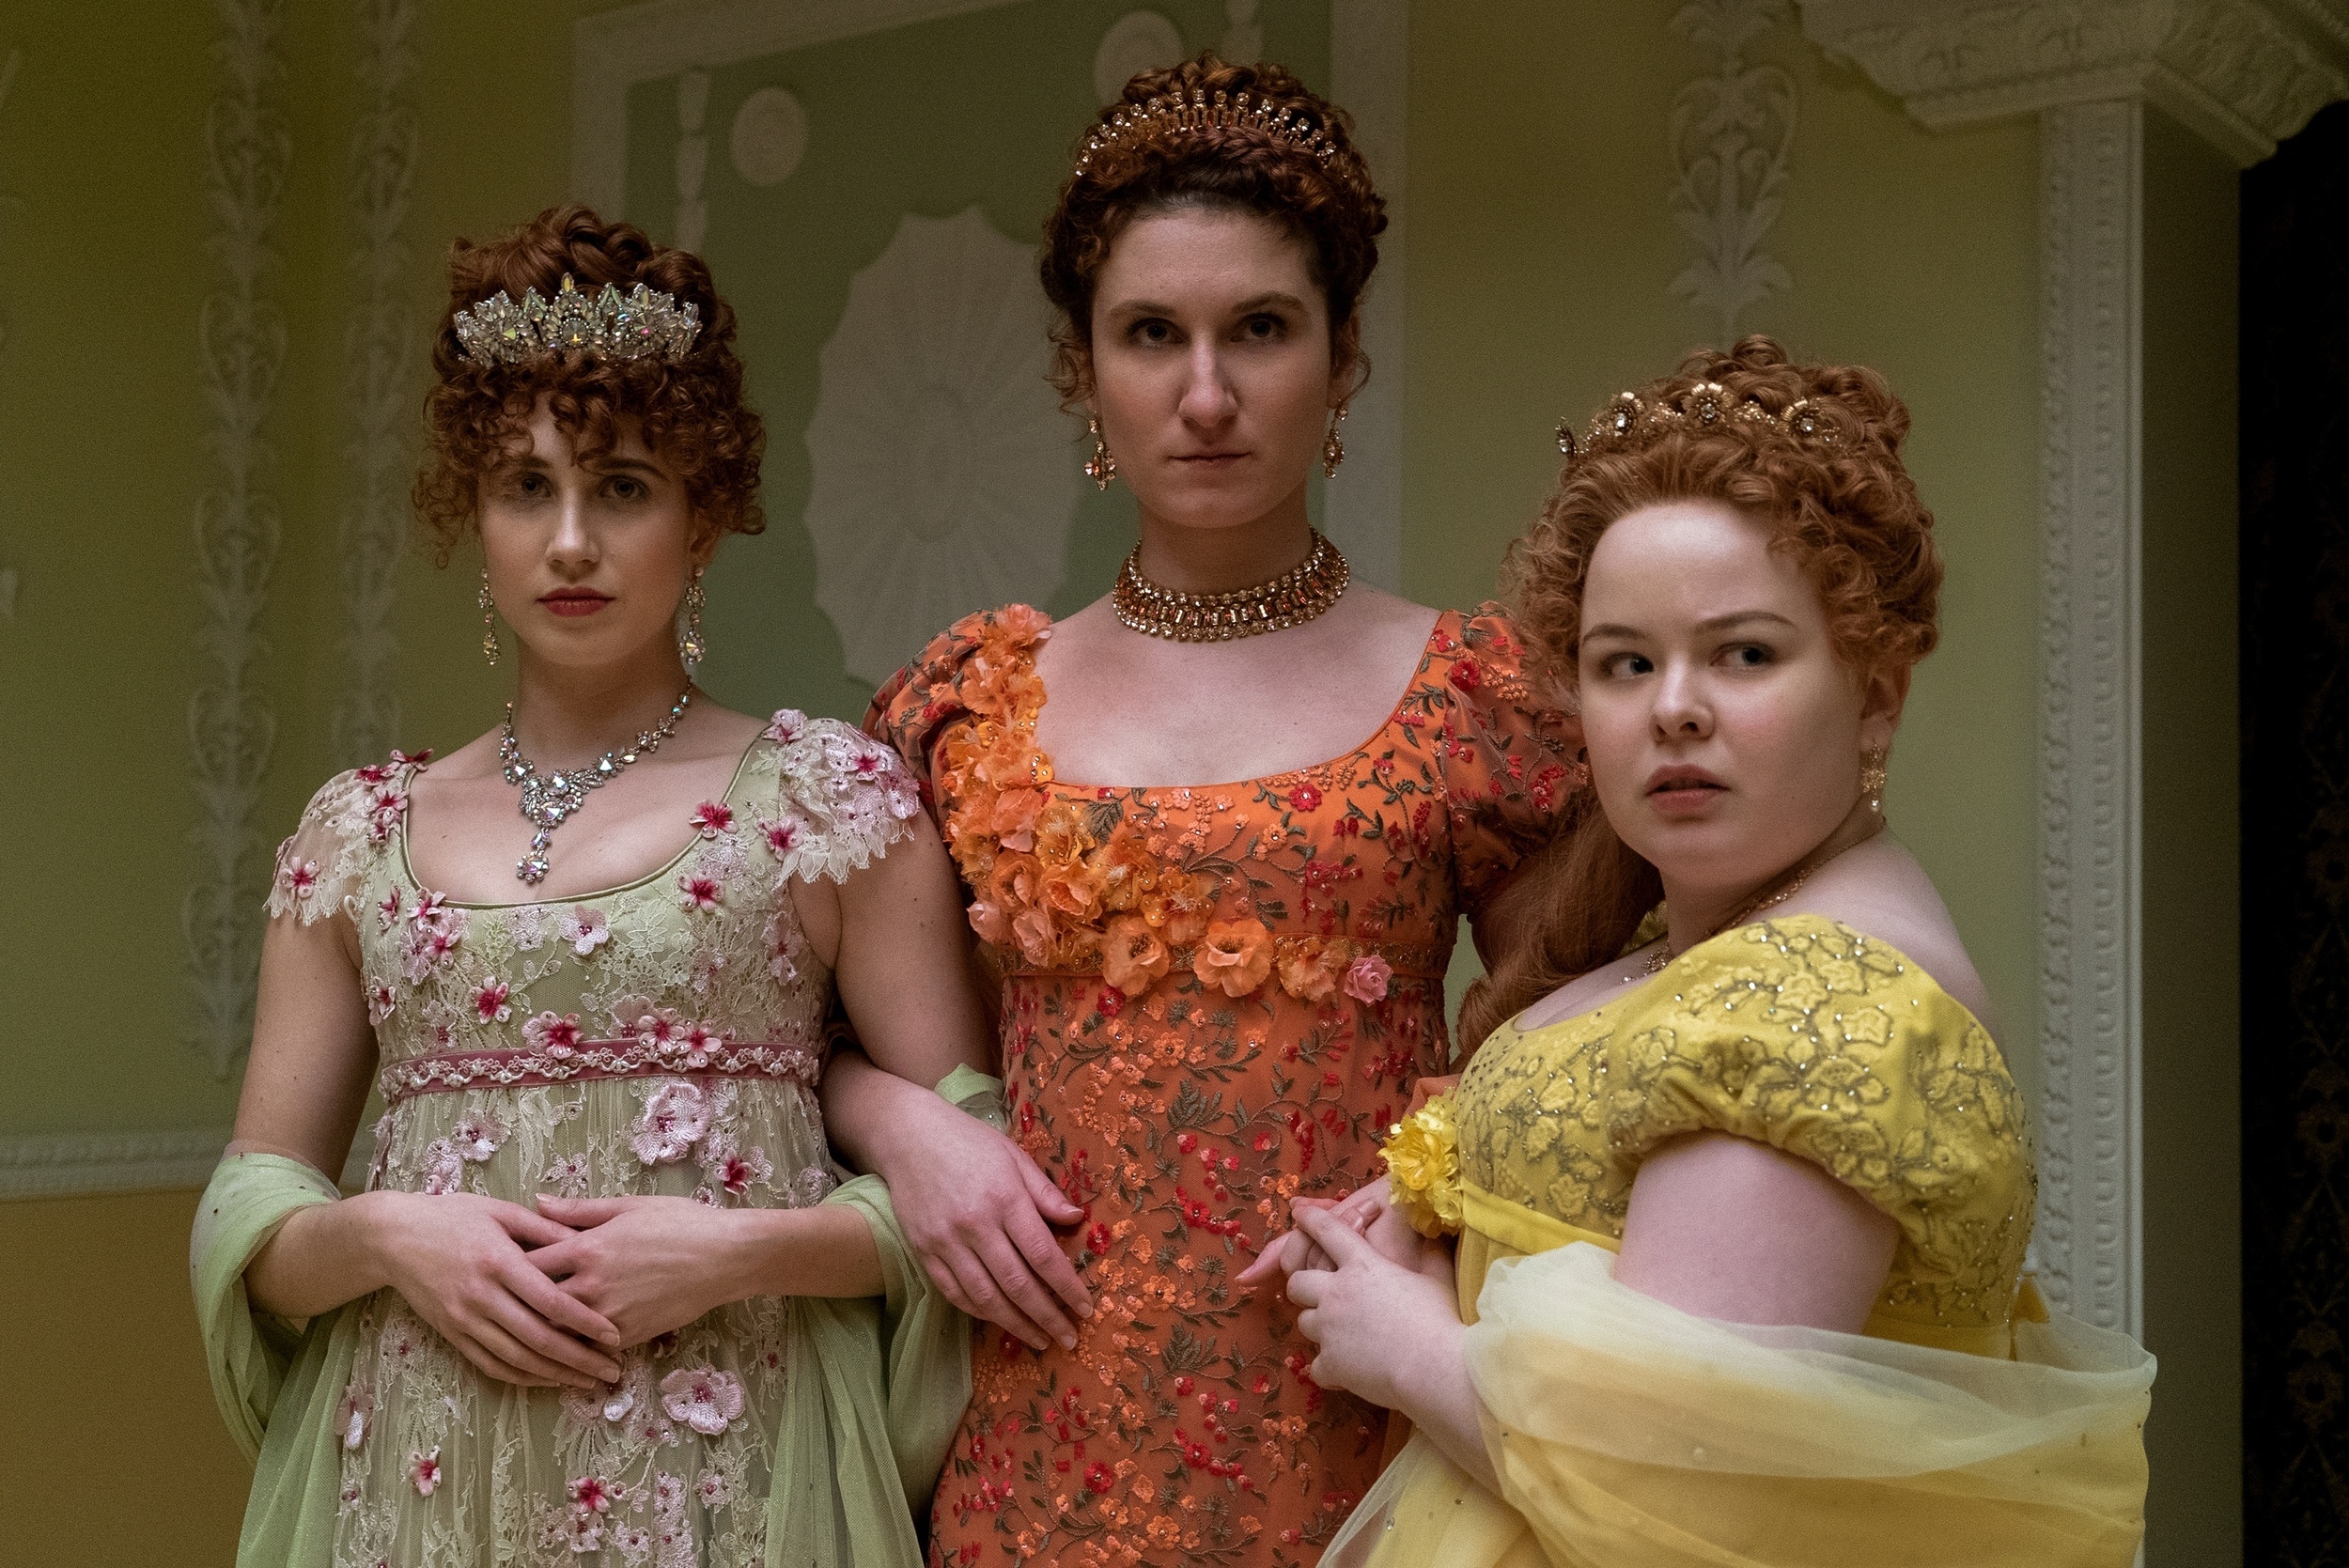 <p>A <em>Bridgerton</em> bachelorette party would be similar in style to <em>Pride and Prejudice</em> but with a little more glamour and drama. Utilize gilded decor and accessories and find a way to incorporate Lady Whistledown. And use the official playlist on Spotify for background music. </p><p><a href='https://www.msn.com/en-us/community/channel/vid-cj9pqbr0vn9in2b6ddcd8sfgpfq6x6utp44fssrv6mc2gtybw0us'>Follow us on MSN to see more of our exclusive lifestyle content.</a></p>